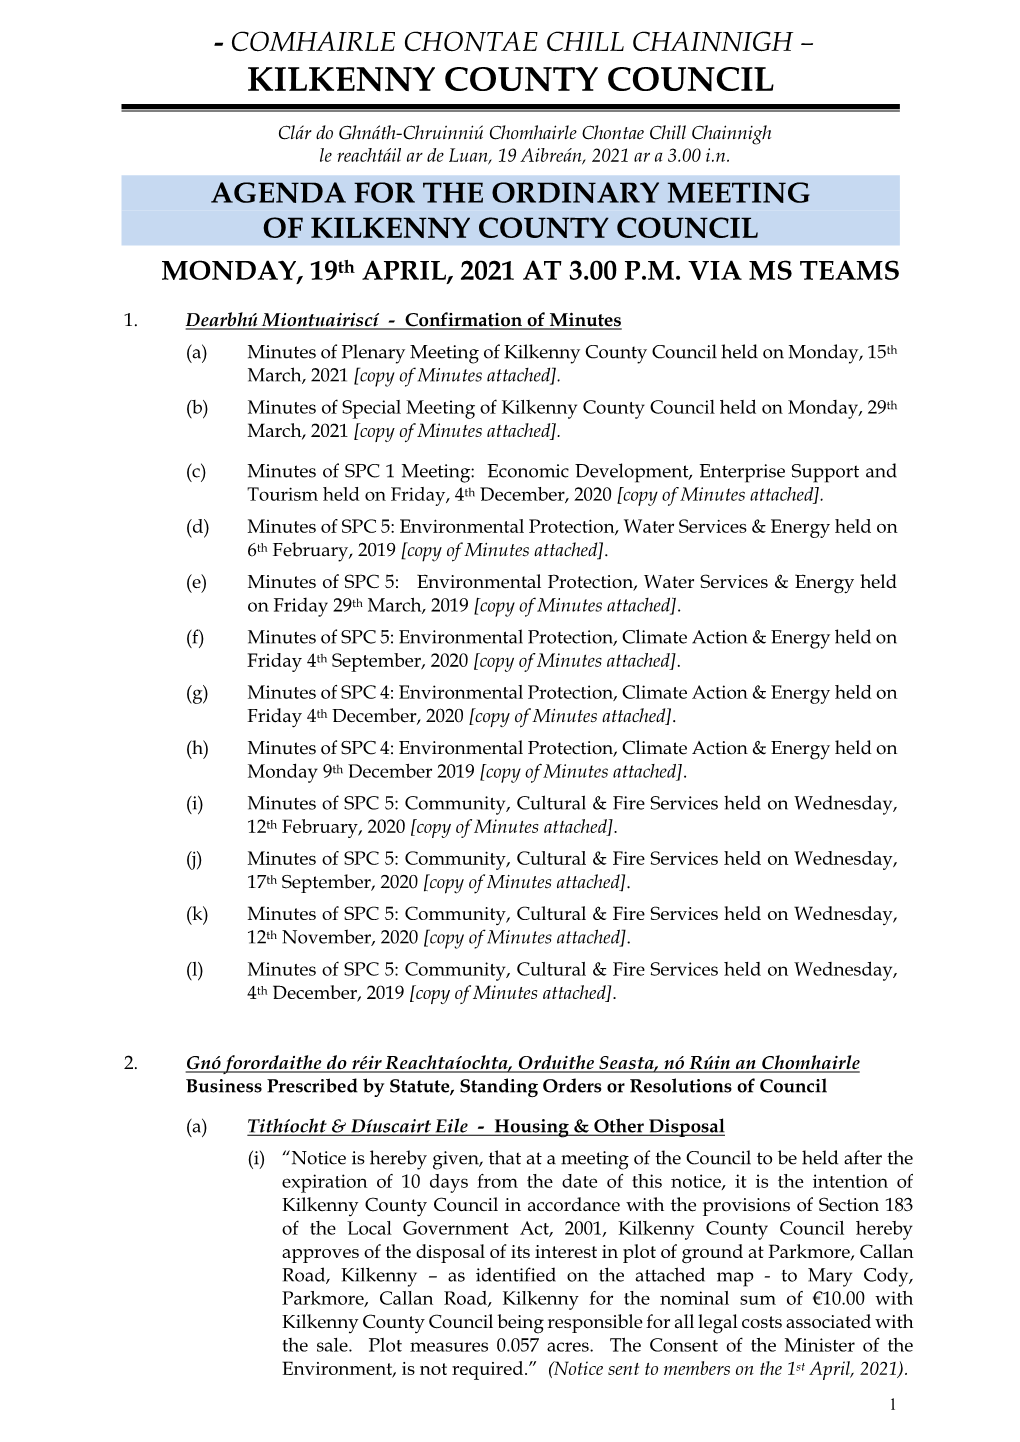 Agenda for the Ordinary Meeting of Kilkenny County Council